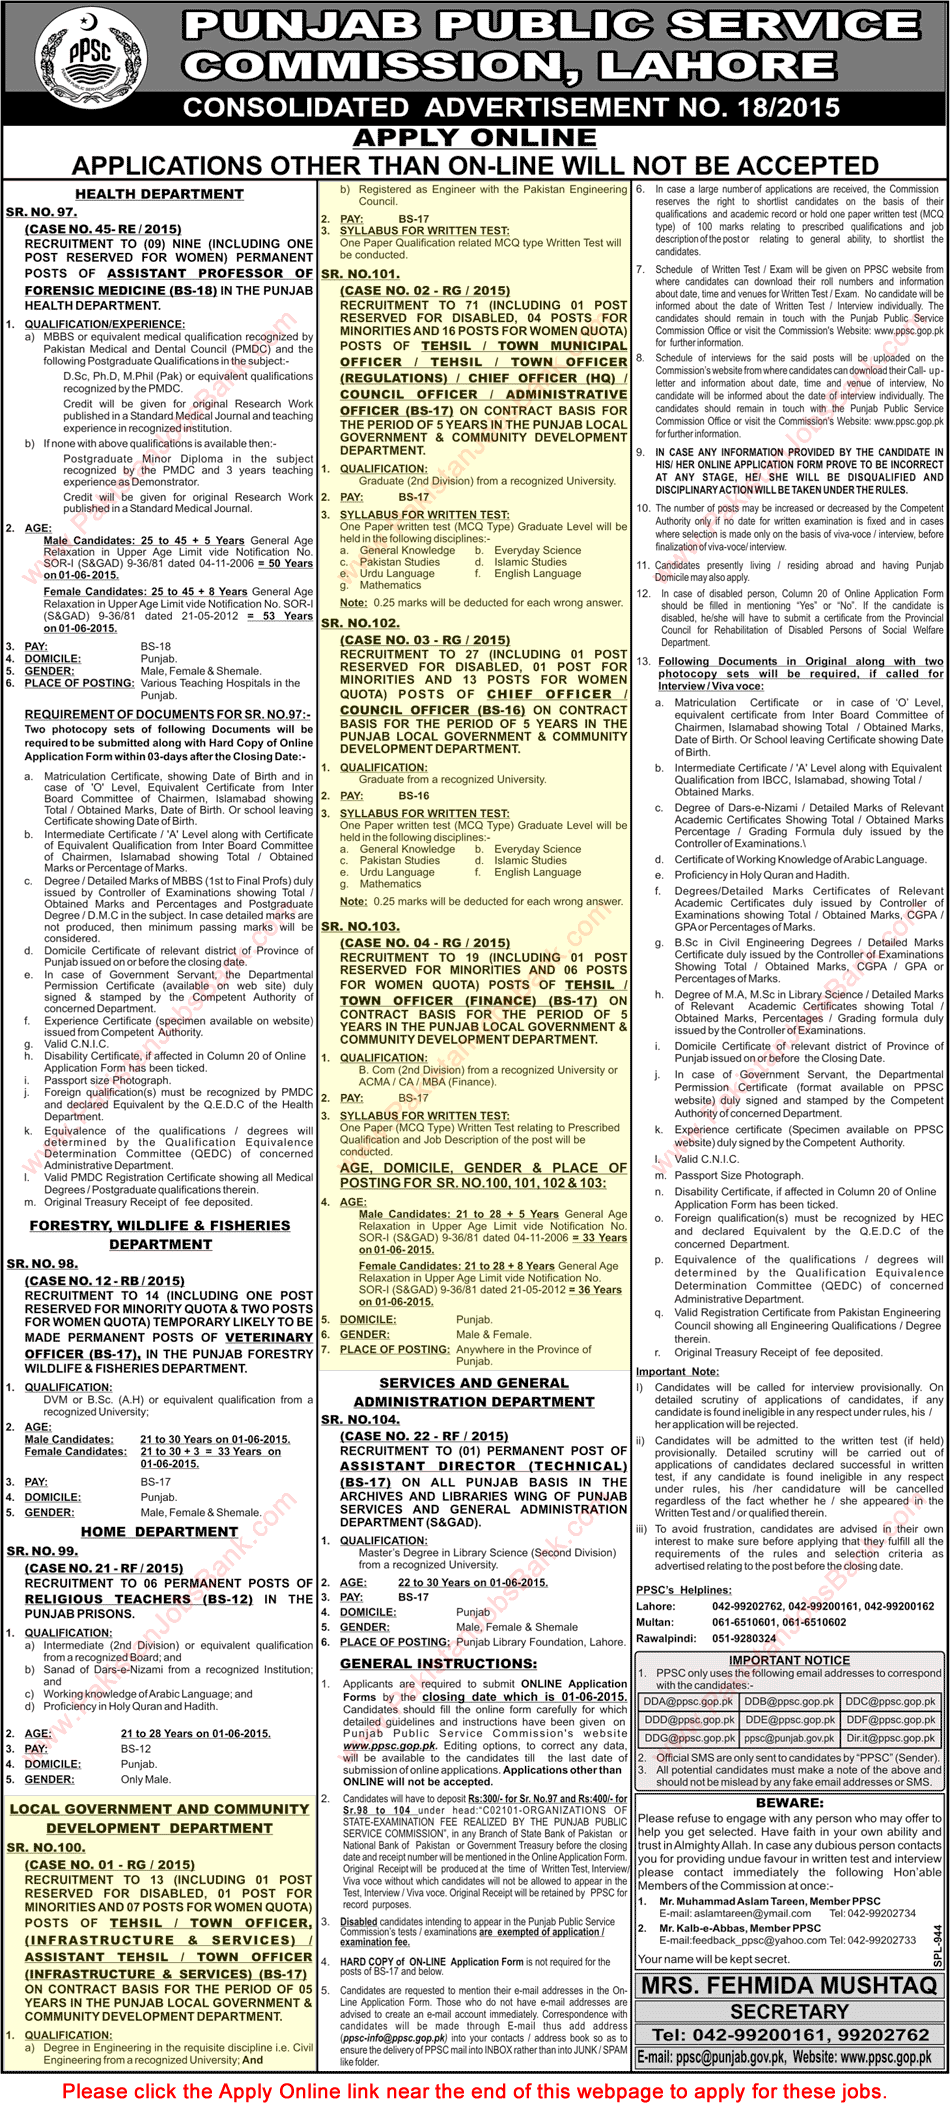 PPSC Tehsil / Town Municipal Officer Jobs in Punjab 2015 May Town / Council Officers LG&CD Department